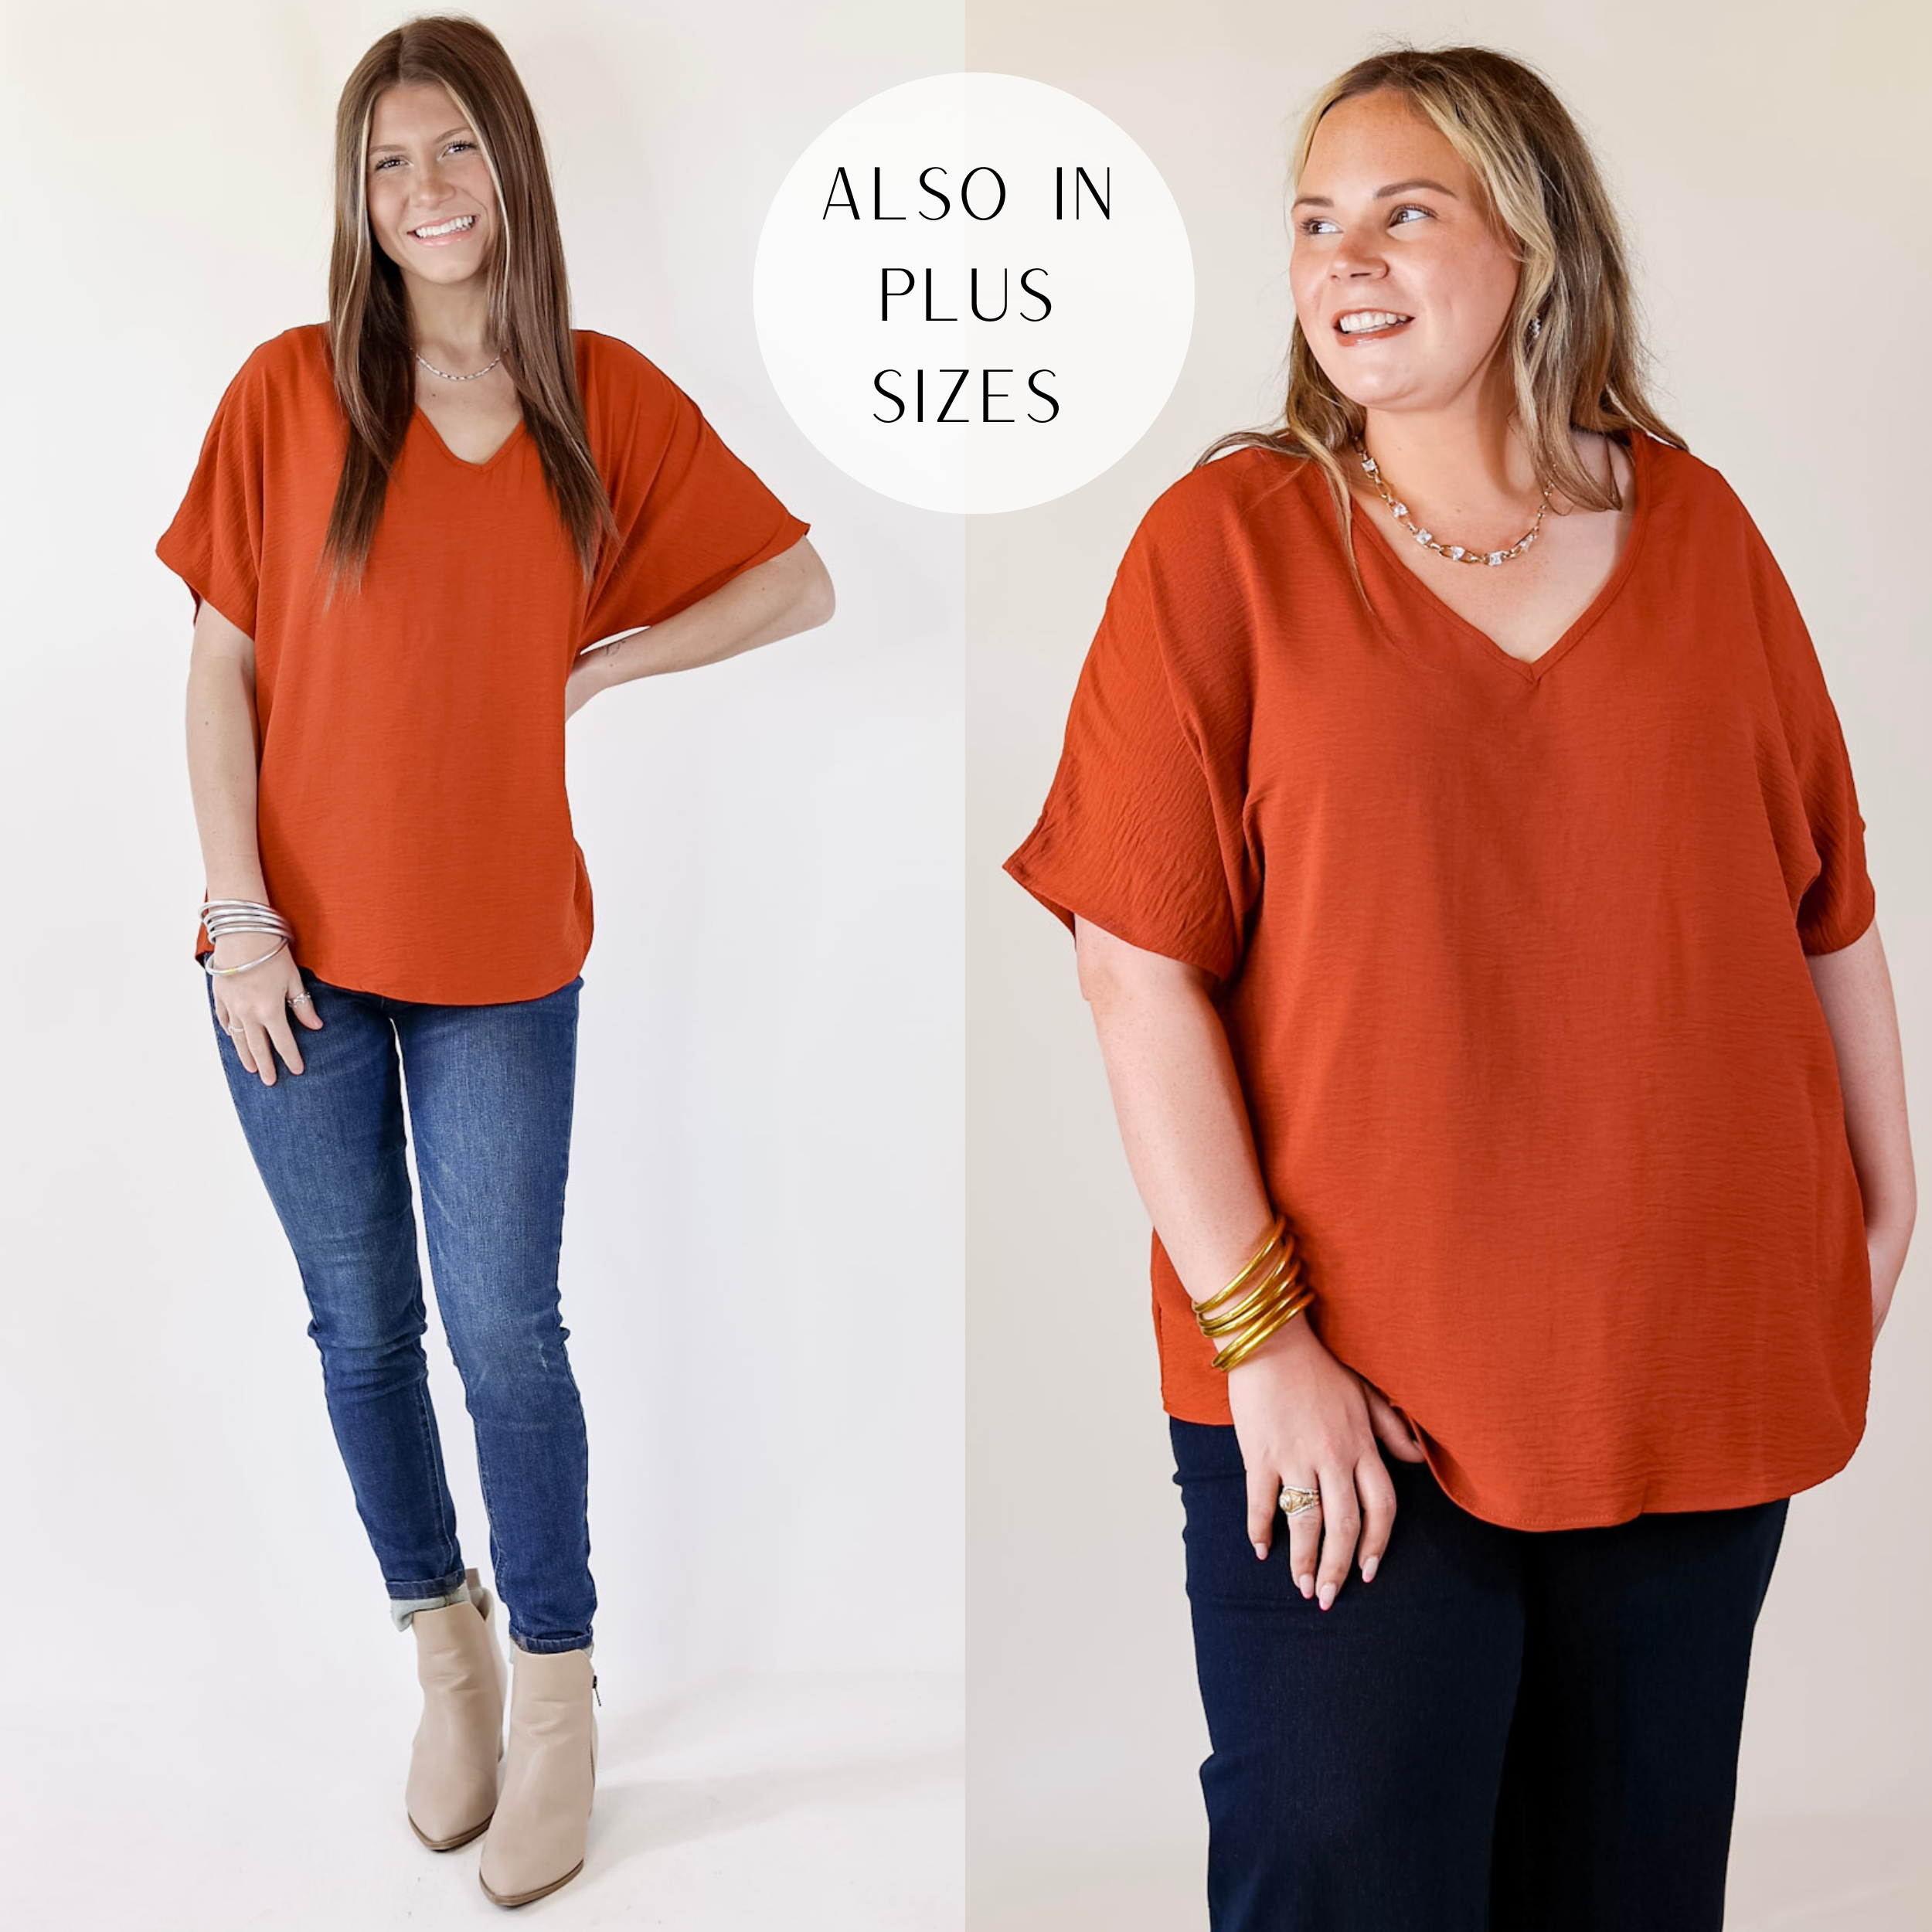 Models are wearing a rust orange top with short sleeves and a v neckline. Size small model has it paired with skinny jeans, nude booties, and silver jewelry. Size large model has it paired with gold jewelry and dark wash jeans.